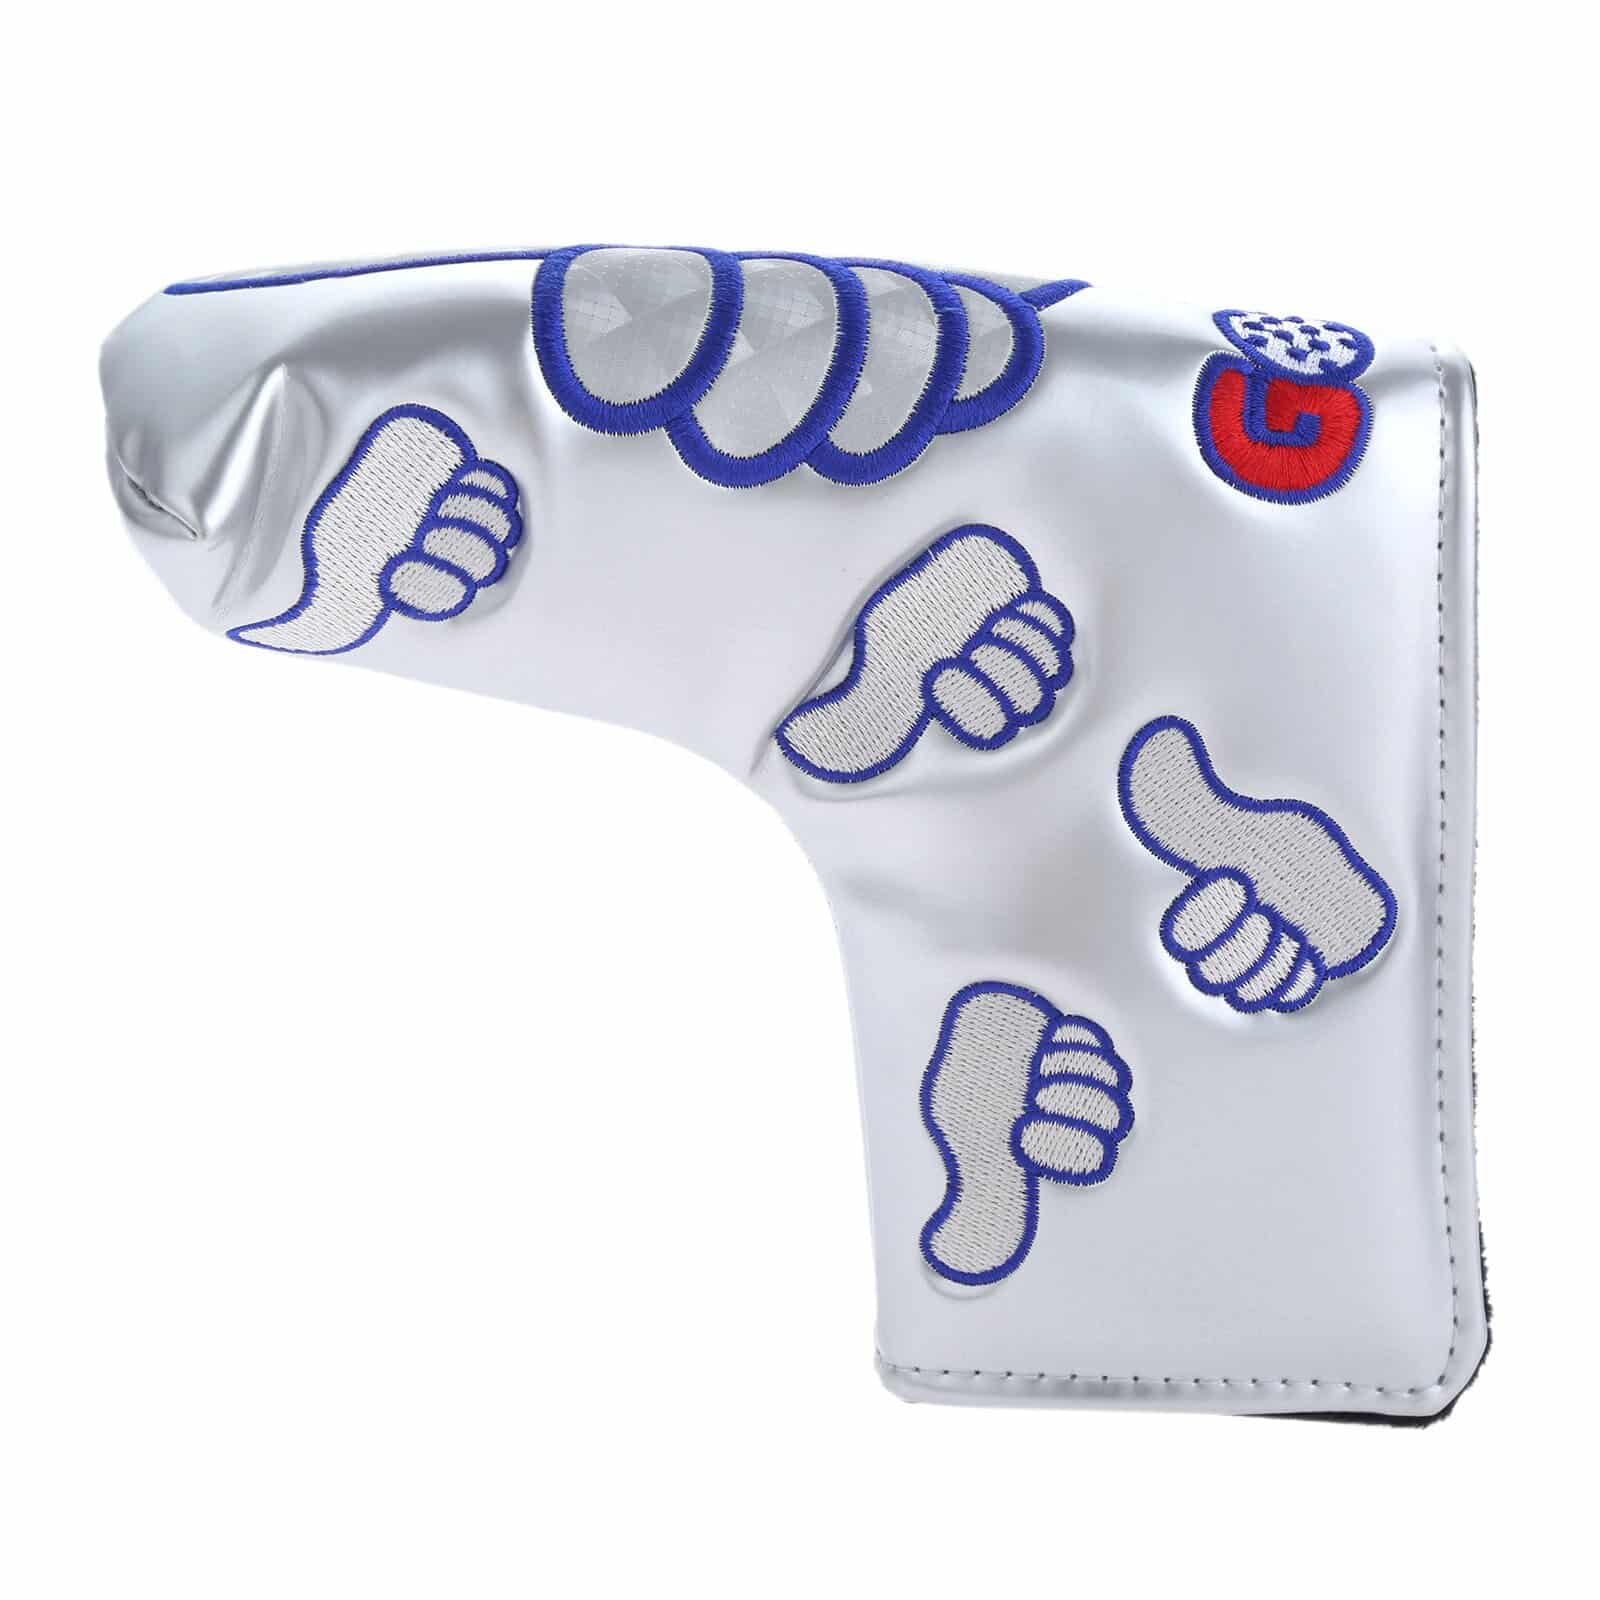 Great Thumb Patterned PU Leather Golf Club Head Cover - Blue Force Sports